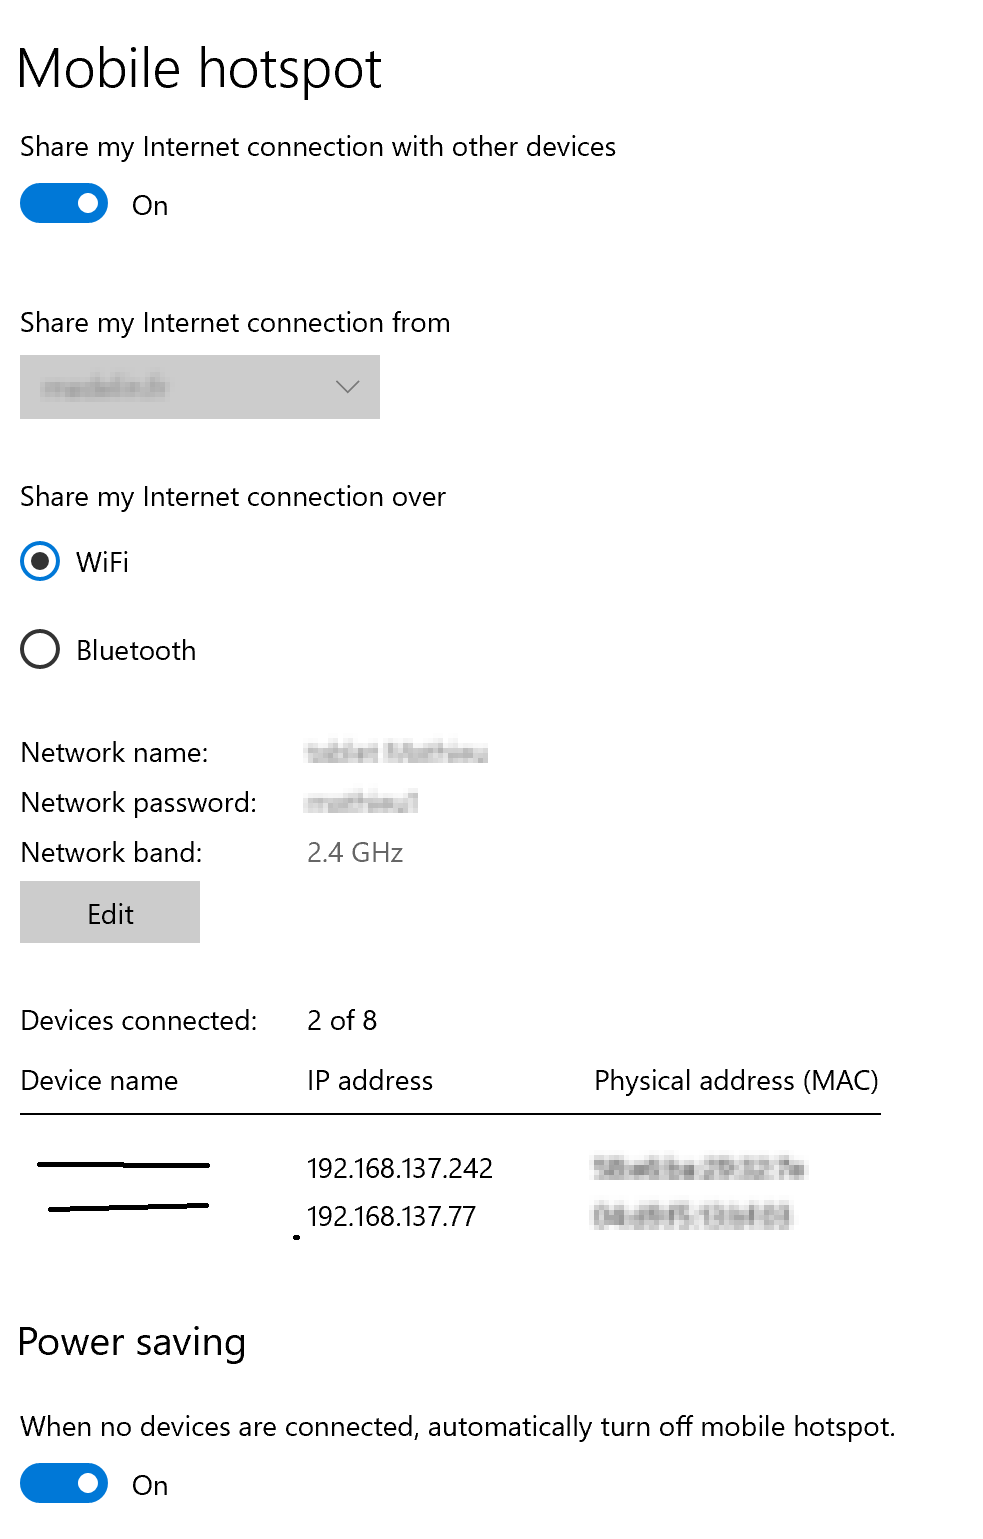 Is it possible to Start the Windows build-in Mobile hotspot from command line?Not the... 7bd9be59-9947-451d-831c-7f47e7849acb?upload=true.png